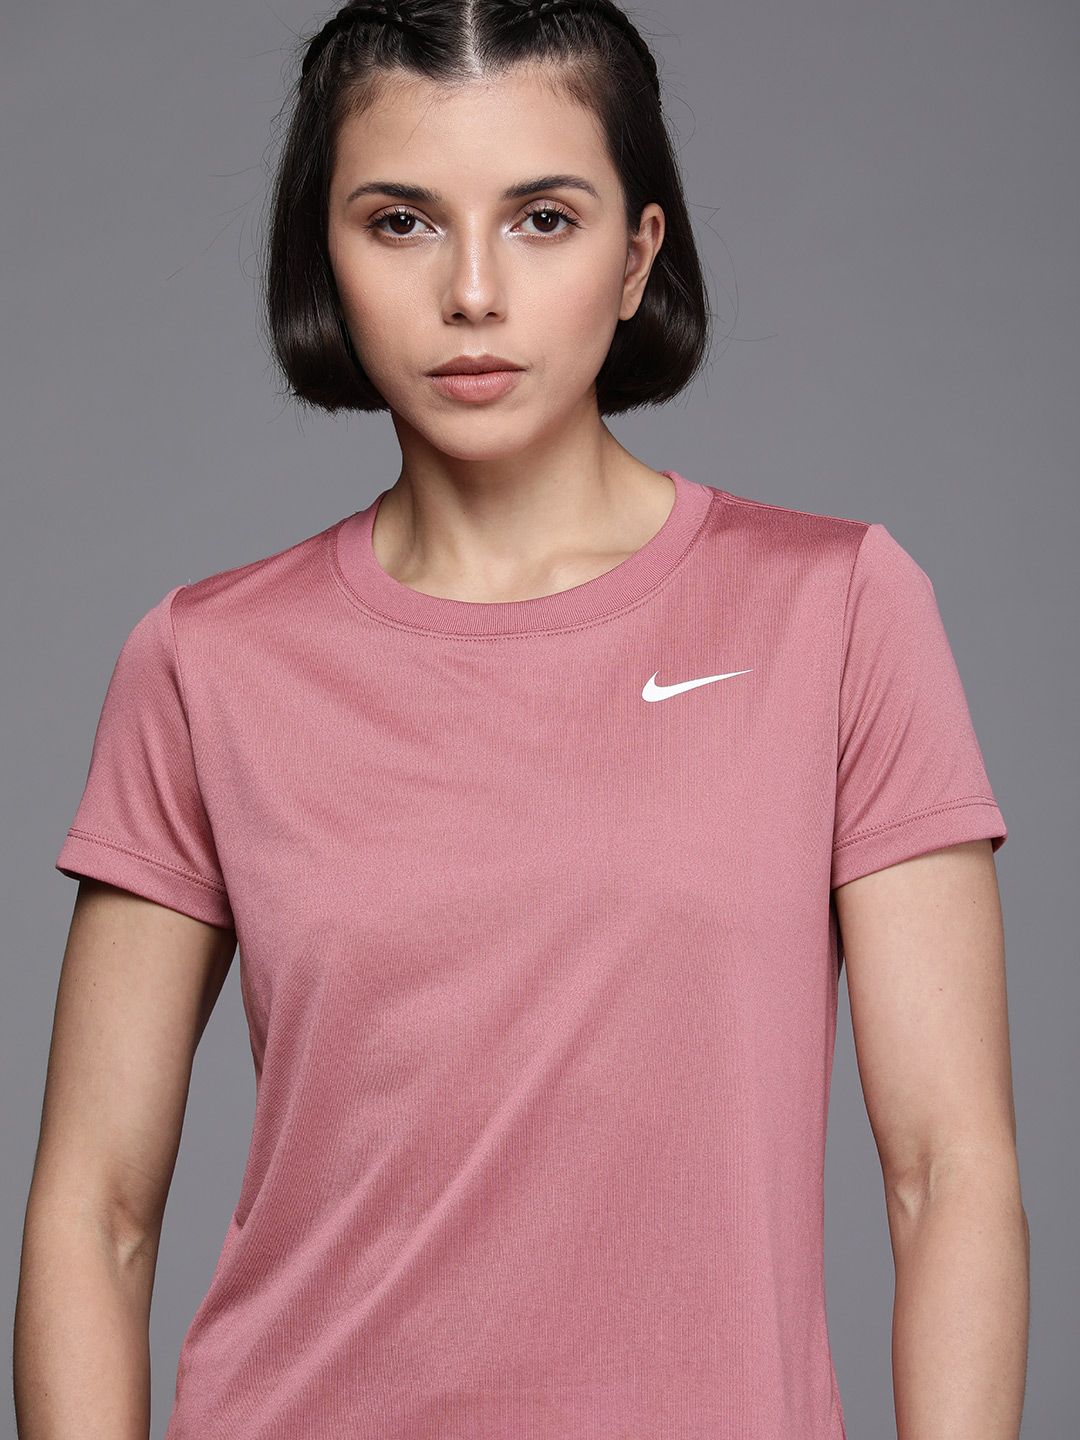 Nike Women Pink Solid Dri-FIT Training T-shirt Price in India